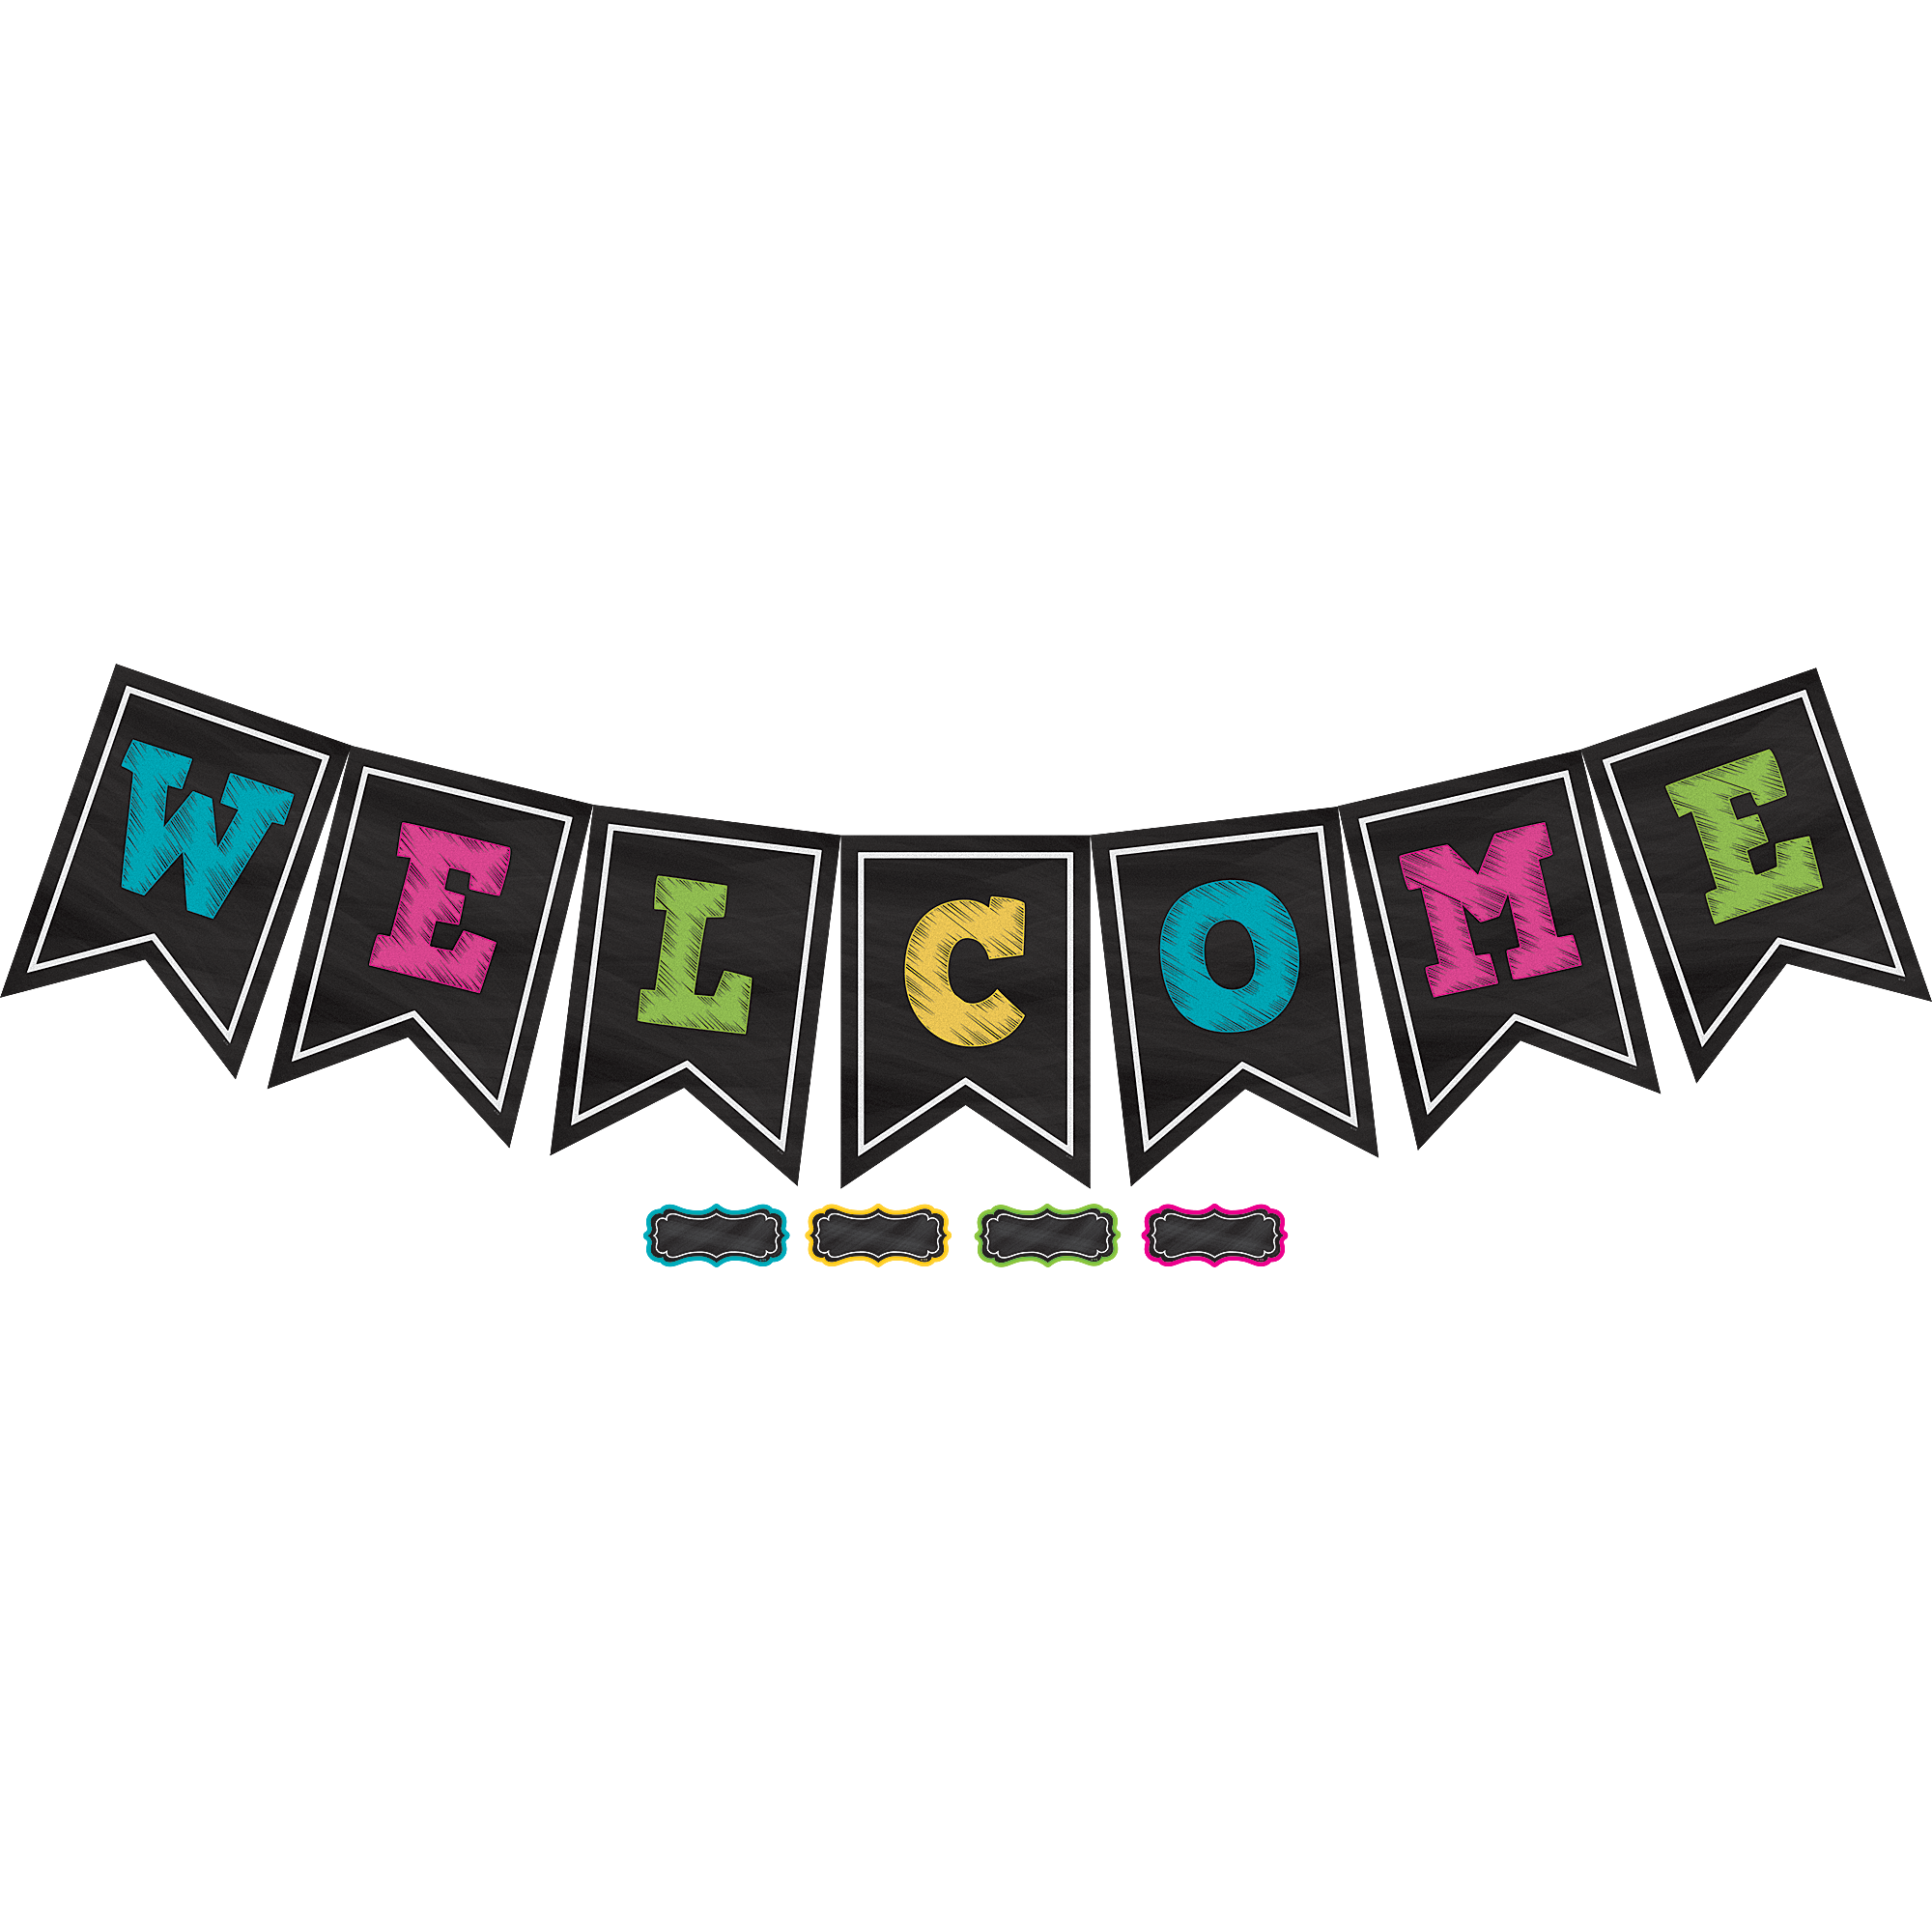 67 Pieces Marquee Welcome Bulletin Board Set Colorful Welcome Banner with Star Shaped Cutouts Classroom Banner Decoration for Teachers and Students Back to School Decoration 